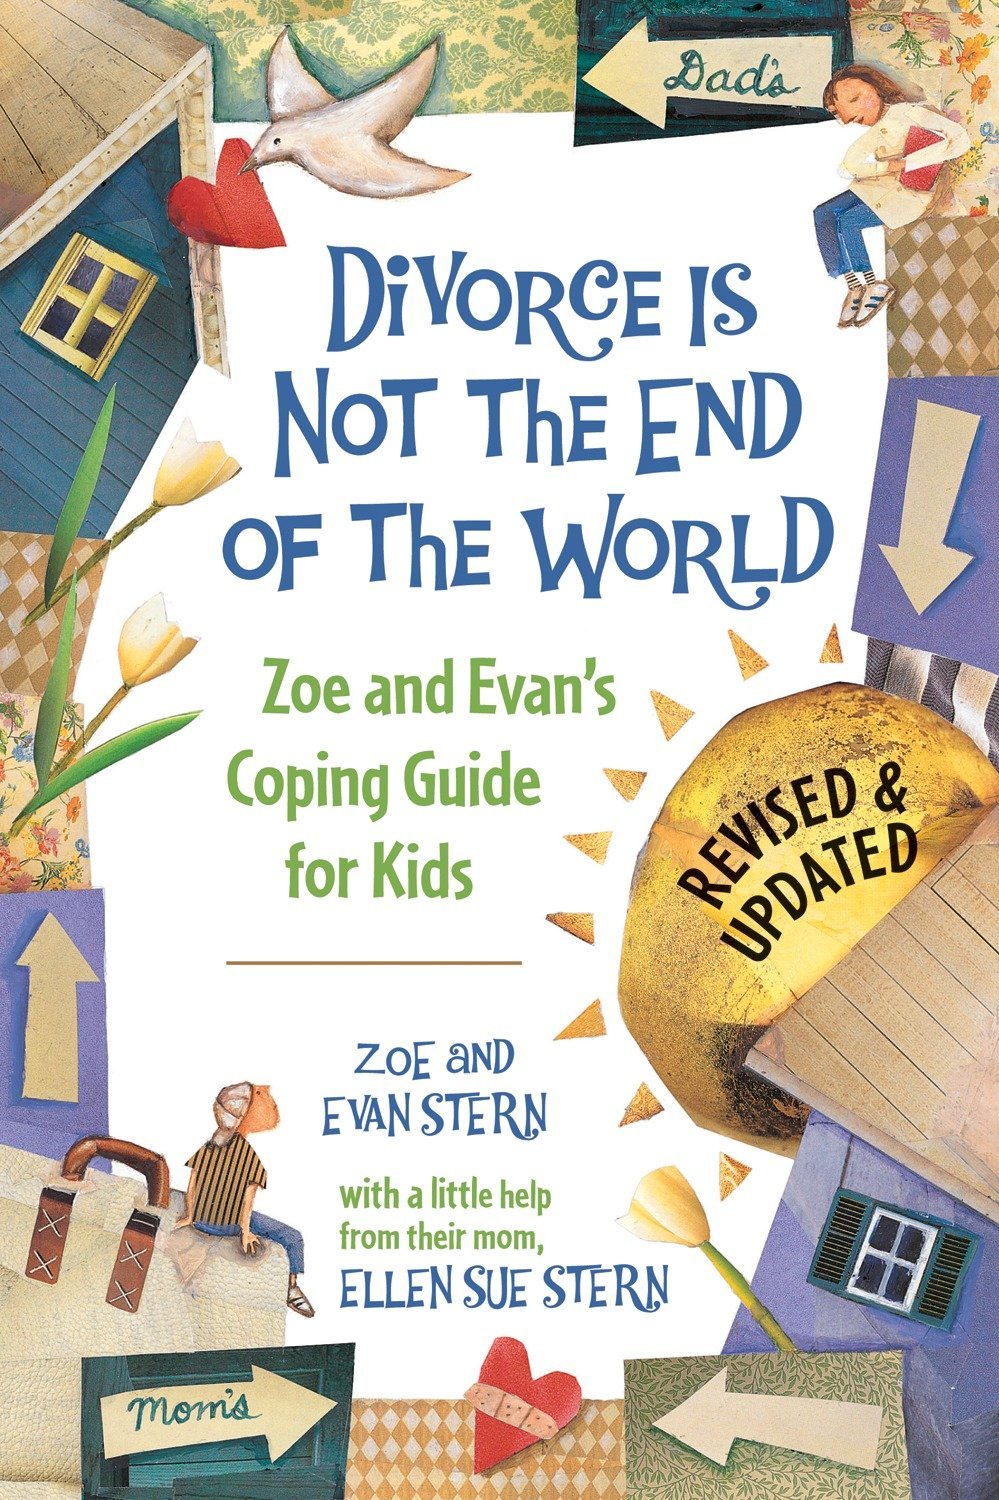 Divorces is Not the End of the World: Zoe’s and Evan’s Coping Guide for Kids